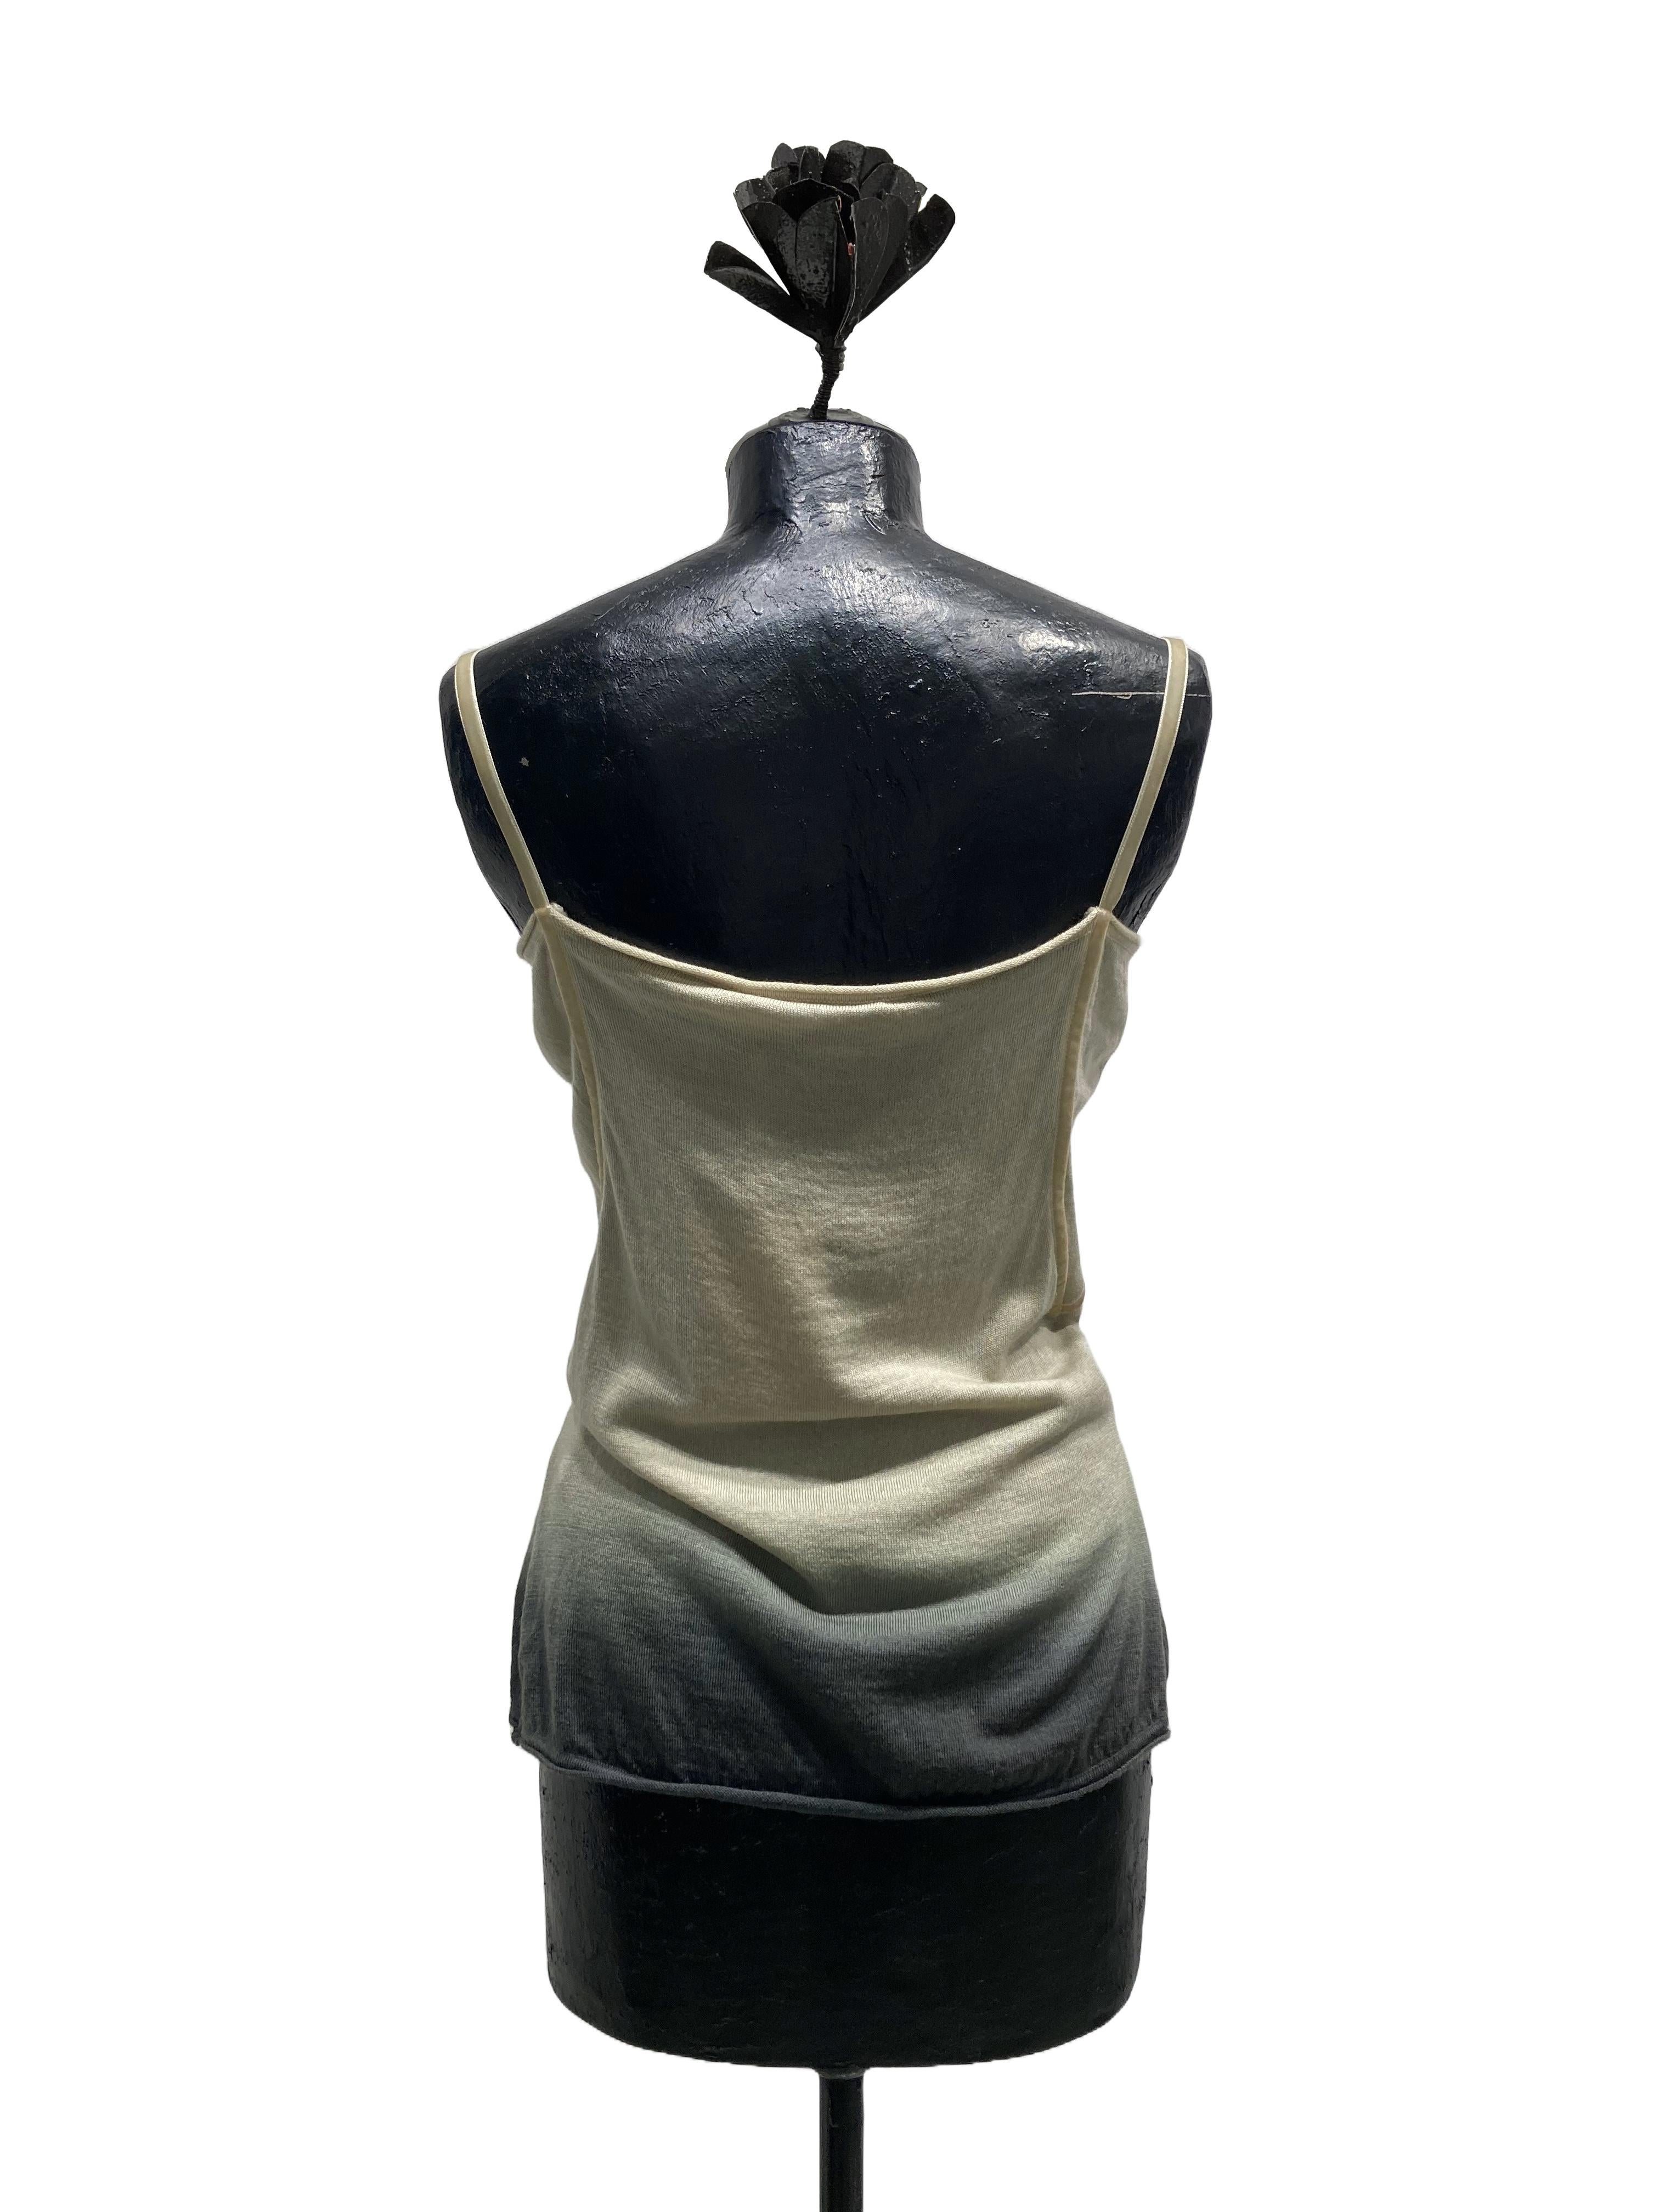 John Galliano's degradé wool knit top from the collection
Ready to Wear Fall Winter 2006. The top is decorated at the front with pleats fixed diagonally by a
velvet ribbon that, reaching to the center of the neckline, ends in a bow.
The same velvet